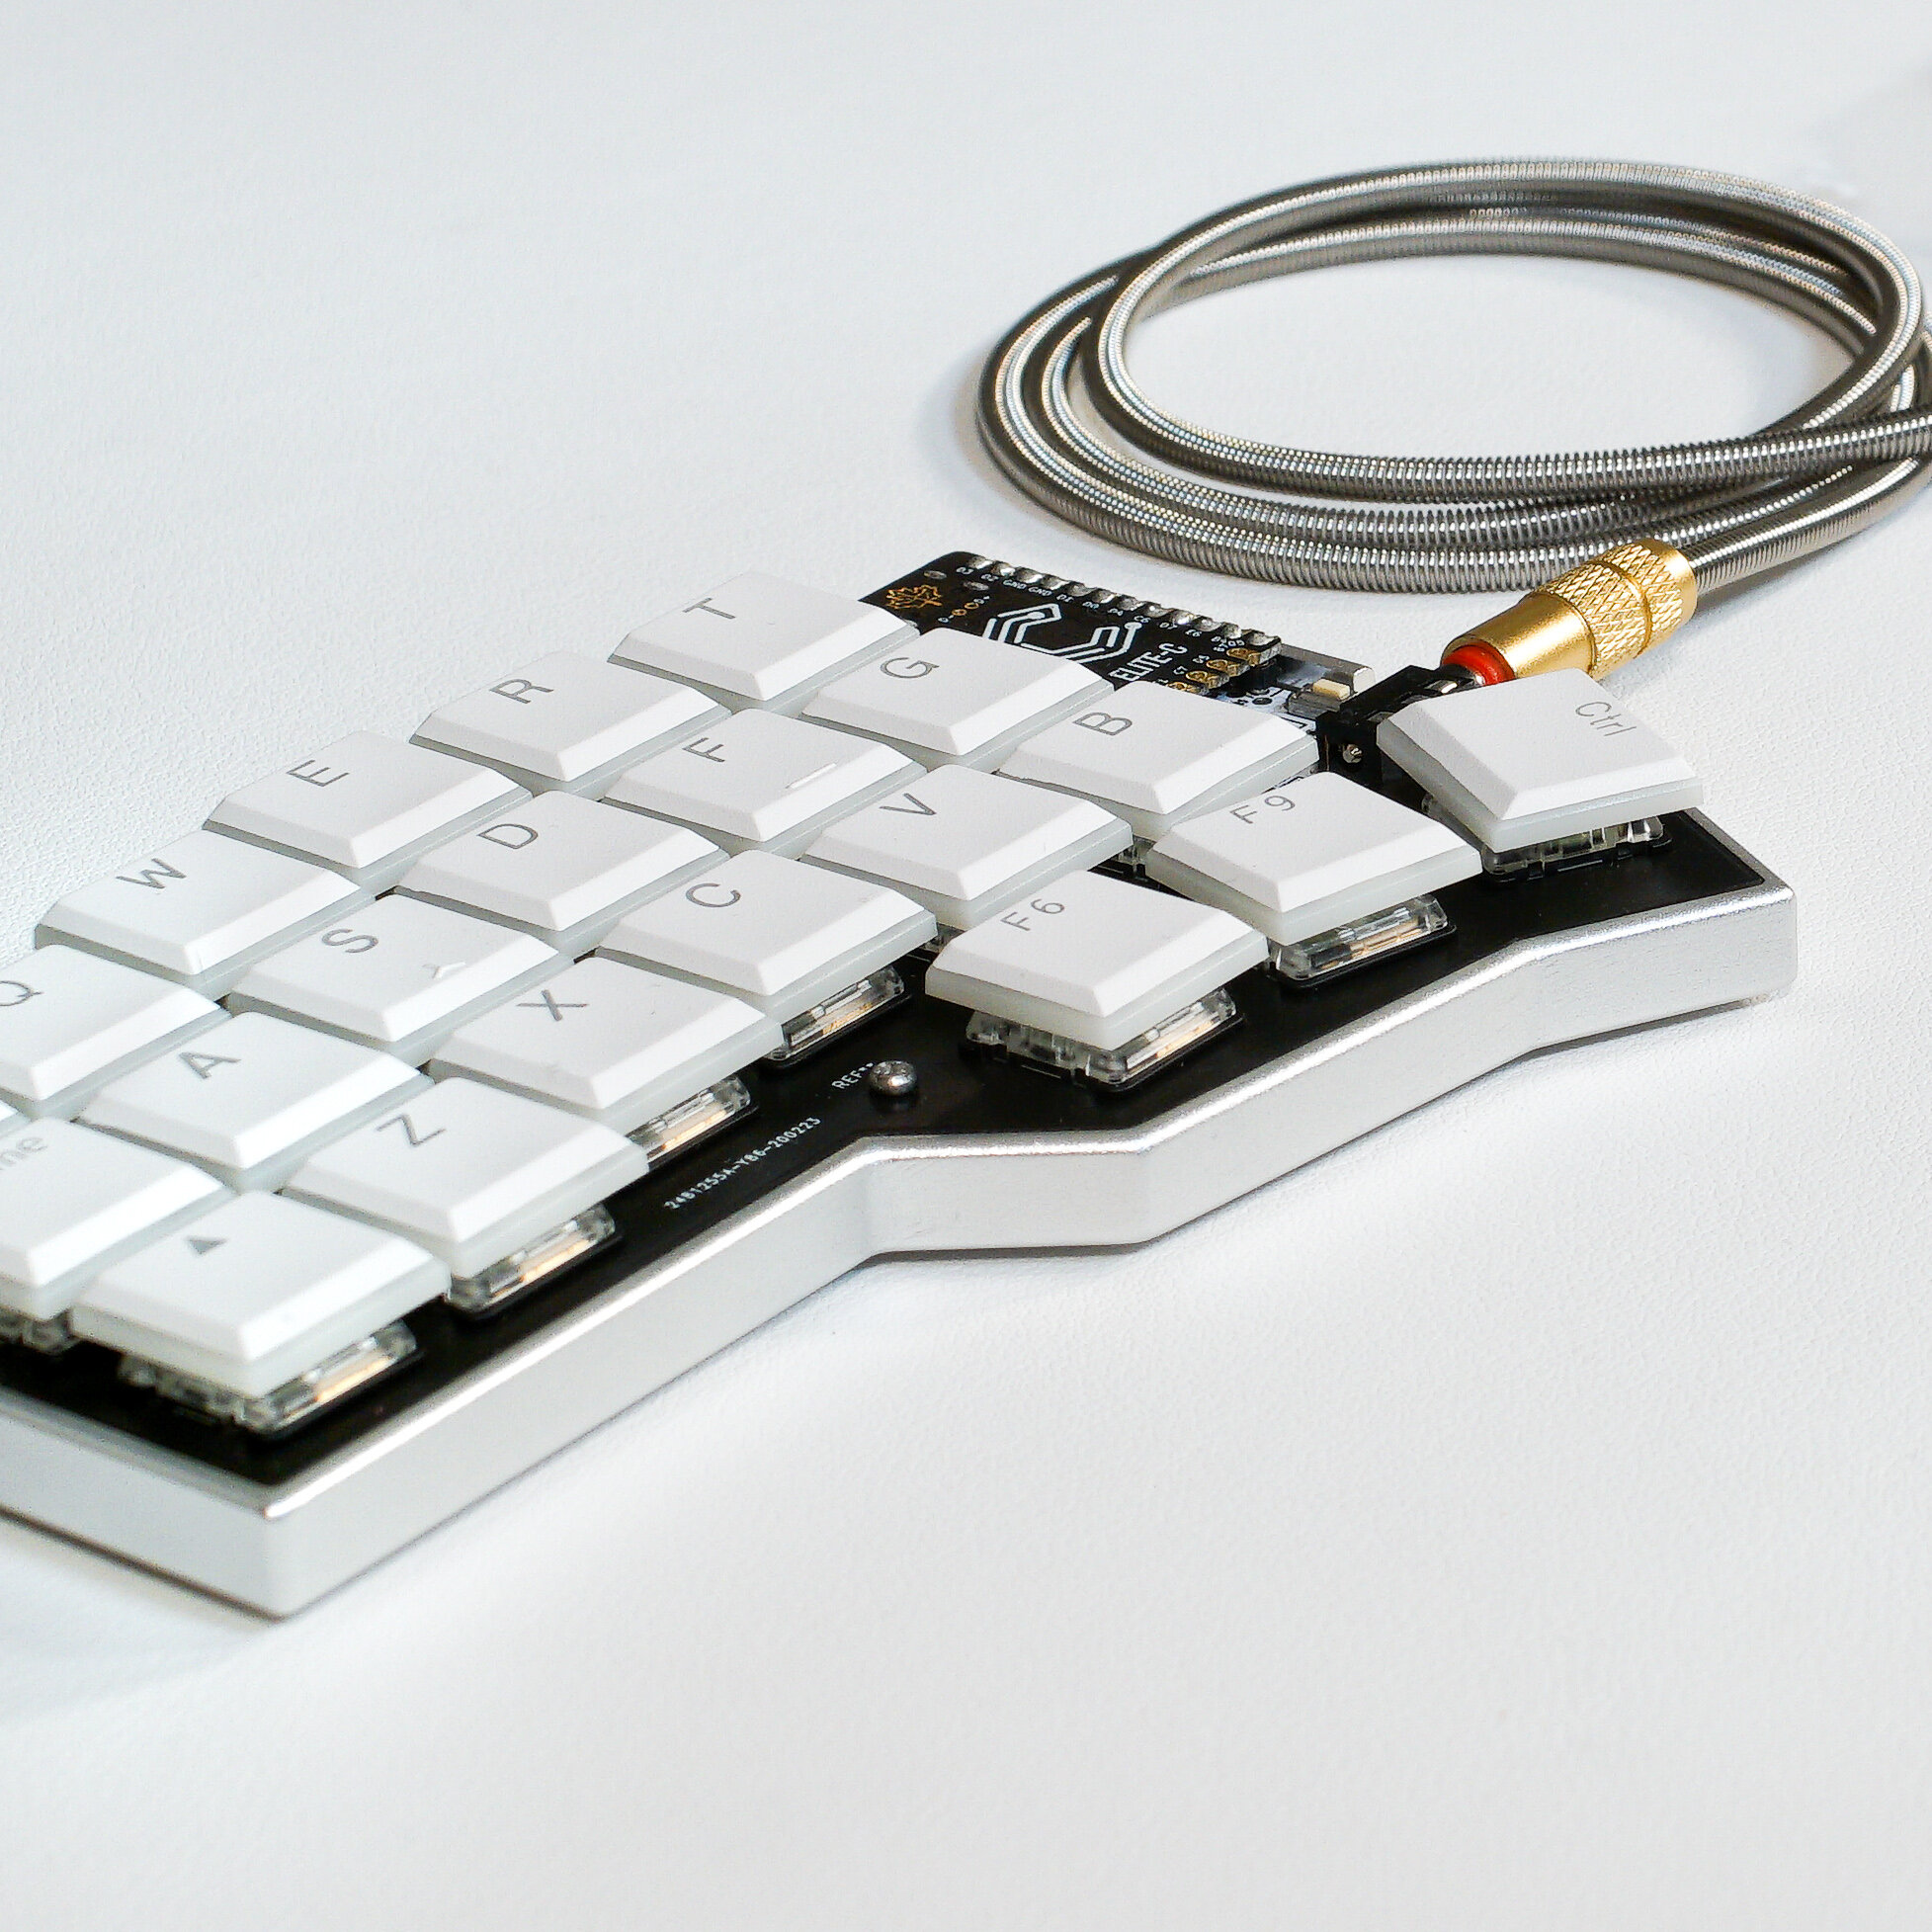 The Corne LP case in silver, with Kailh Choc white keycaps, an Elite C and a metal TRRS cable.